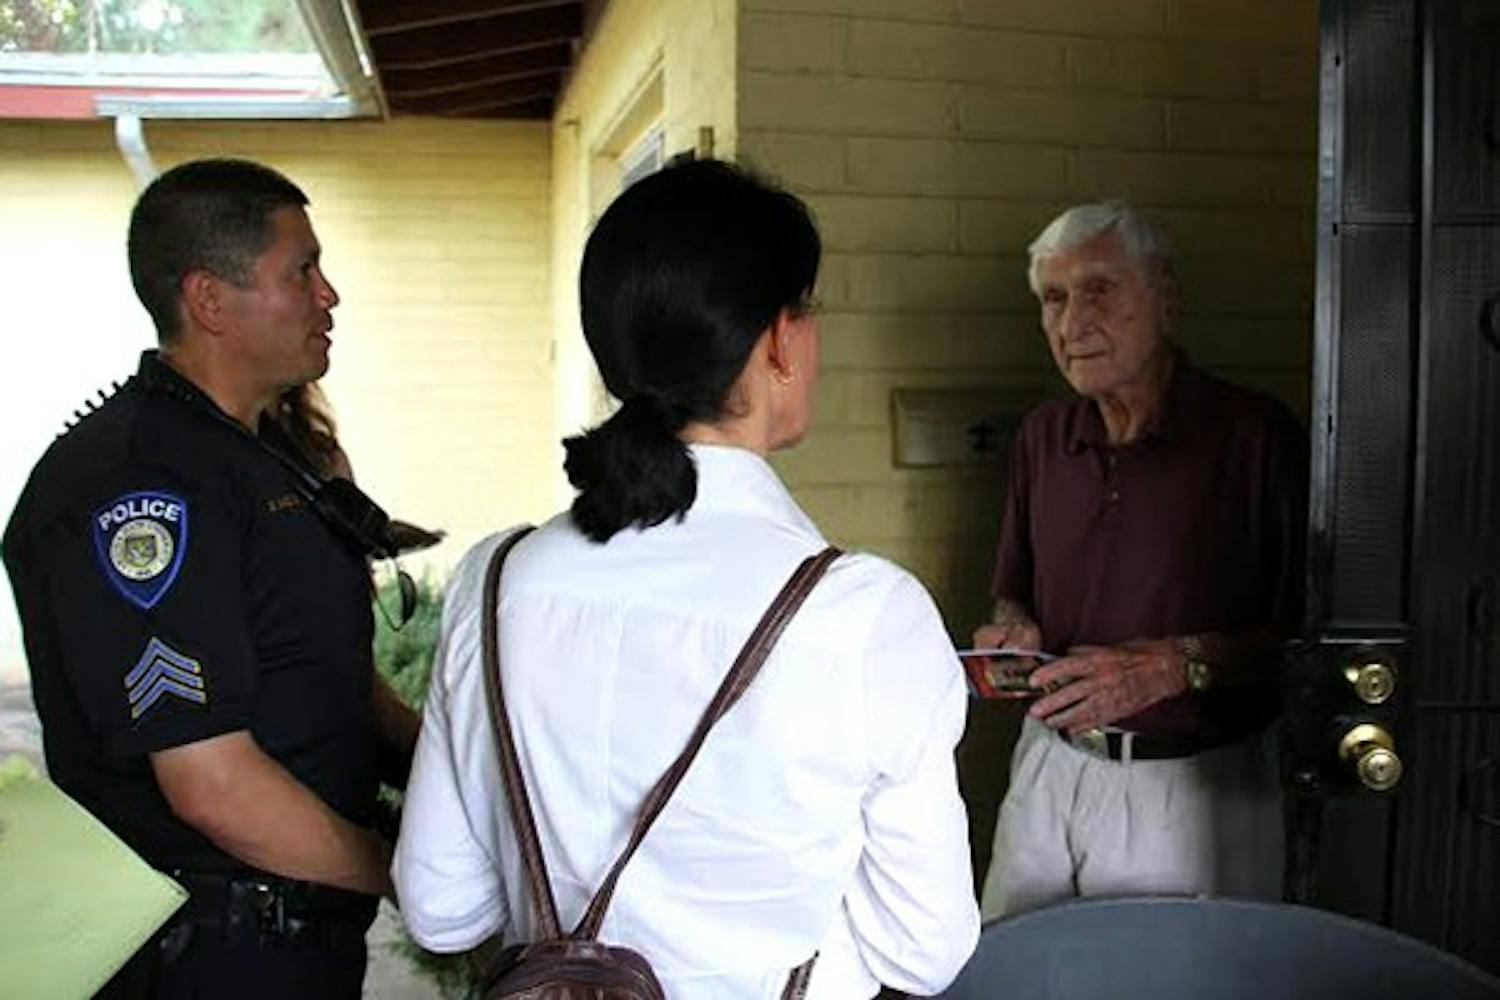 Tempe resident Jene Cornow talks to Julie Newberg, a member of ASU’s media relations team, and ASU Police Department Sargent Dan Macias about what is like to live in a neighborhood so close to a major university. (Photo by Peter Mare)